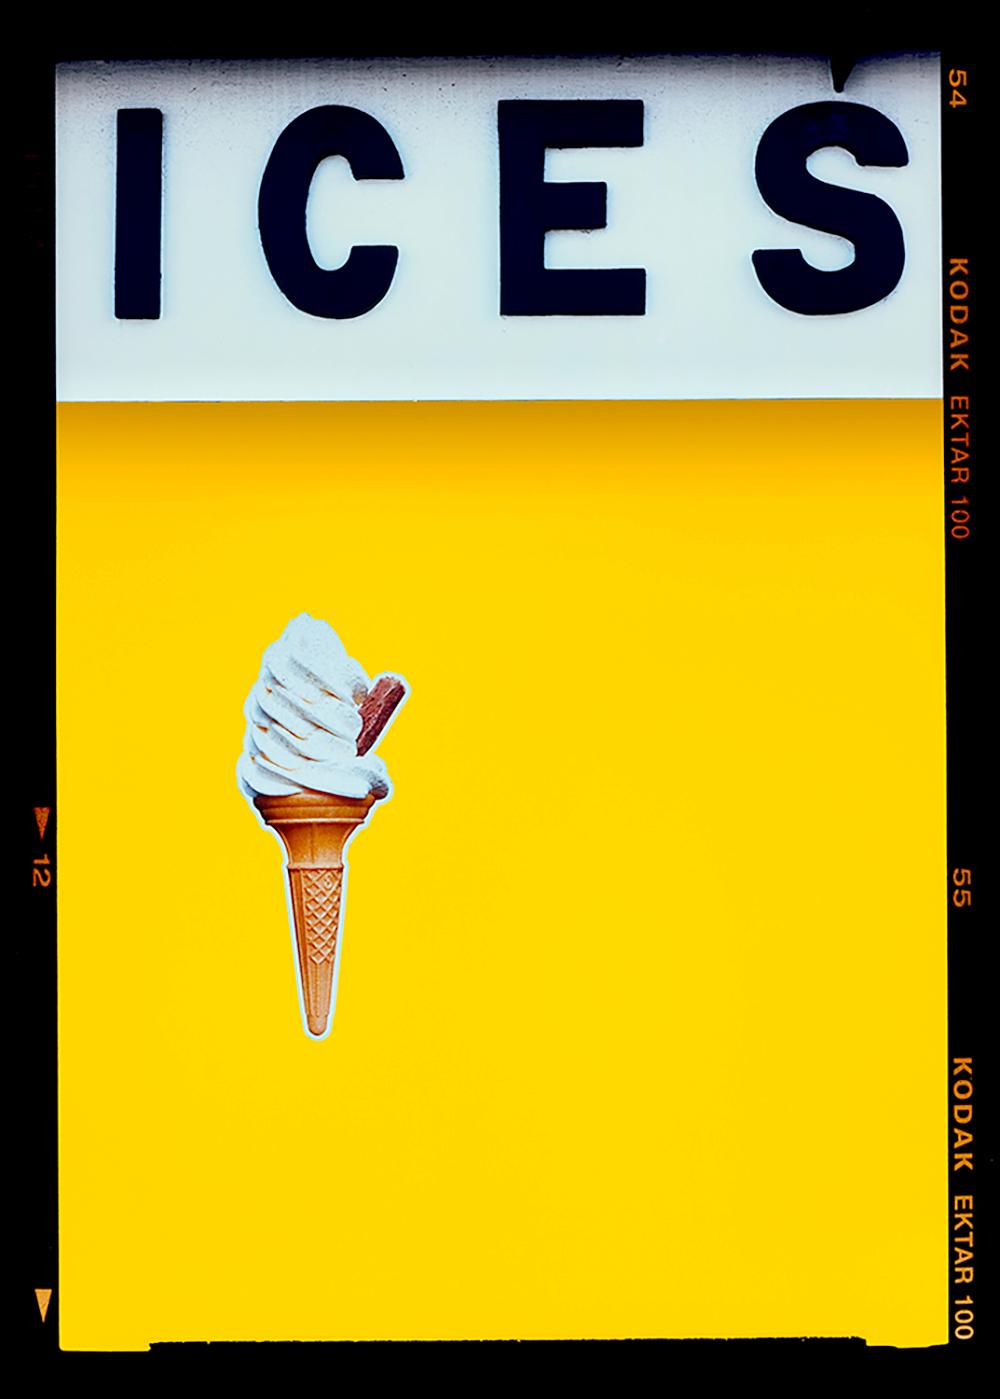 Richard Heeps Color Photograph - Ices (Yellow), Bexhill-on-Sea - British seaside color photography